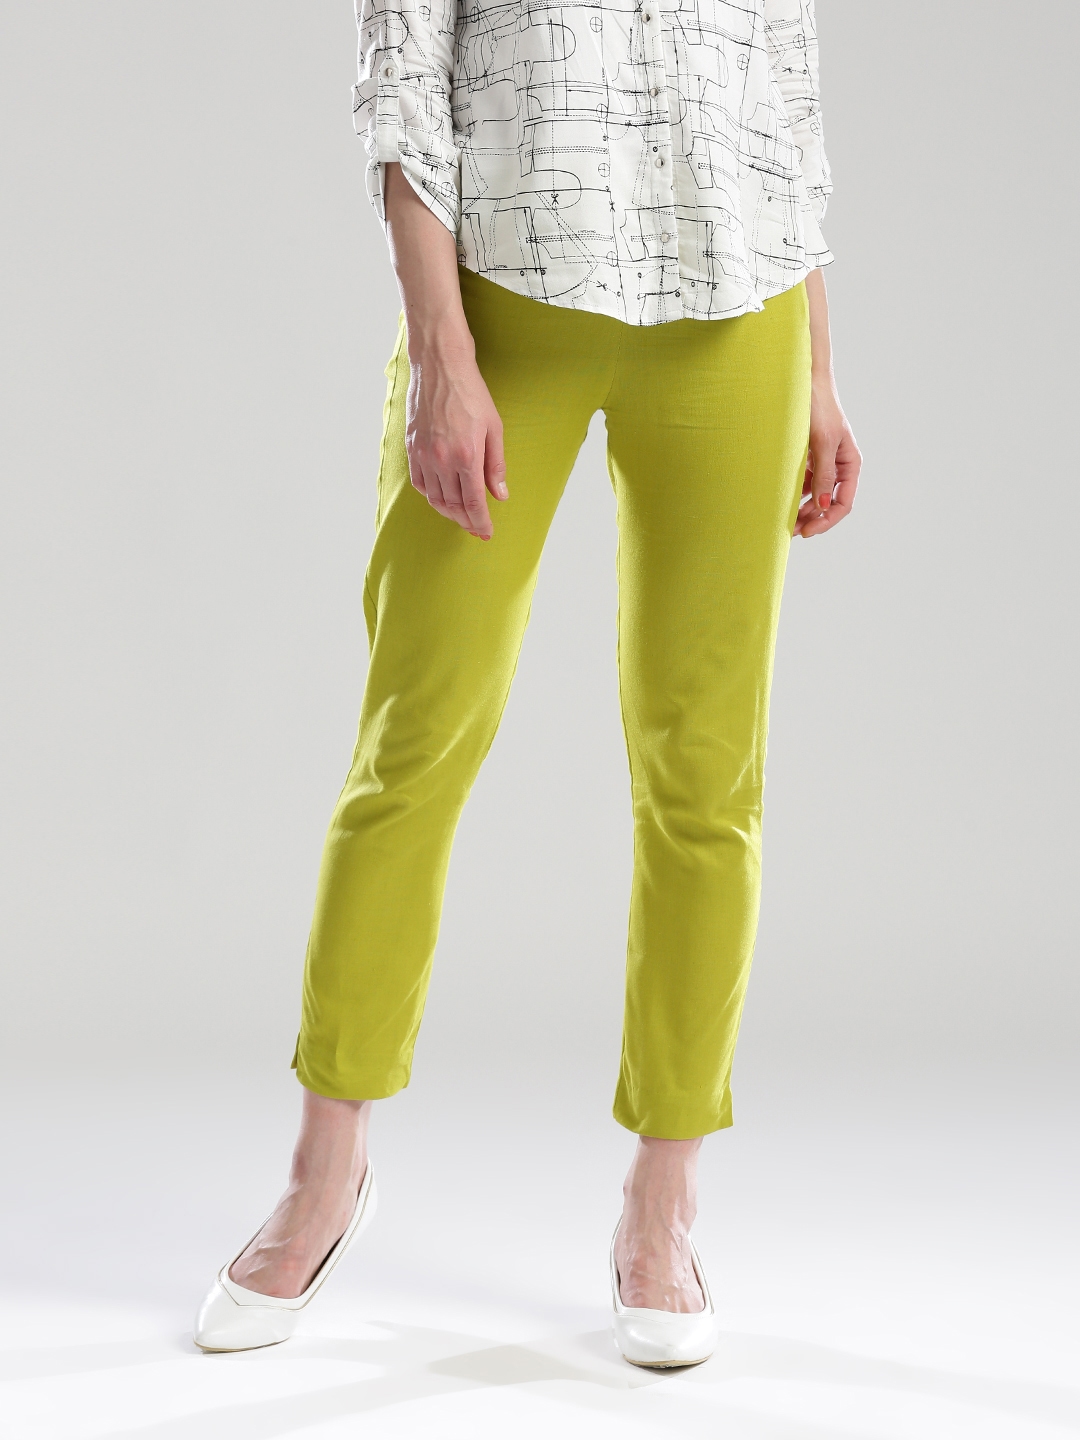 Amazon.com: JZRH Pants for Women - Neon Green Cargo Pants (Color : Lime  Green, Size : Large) : Clothing, Shoes & Jewelry